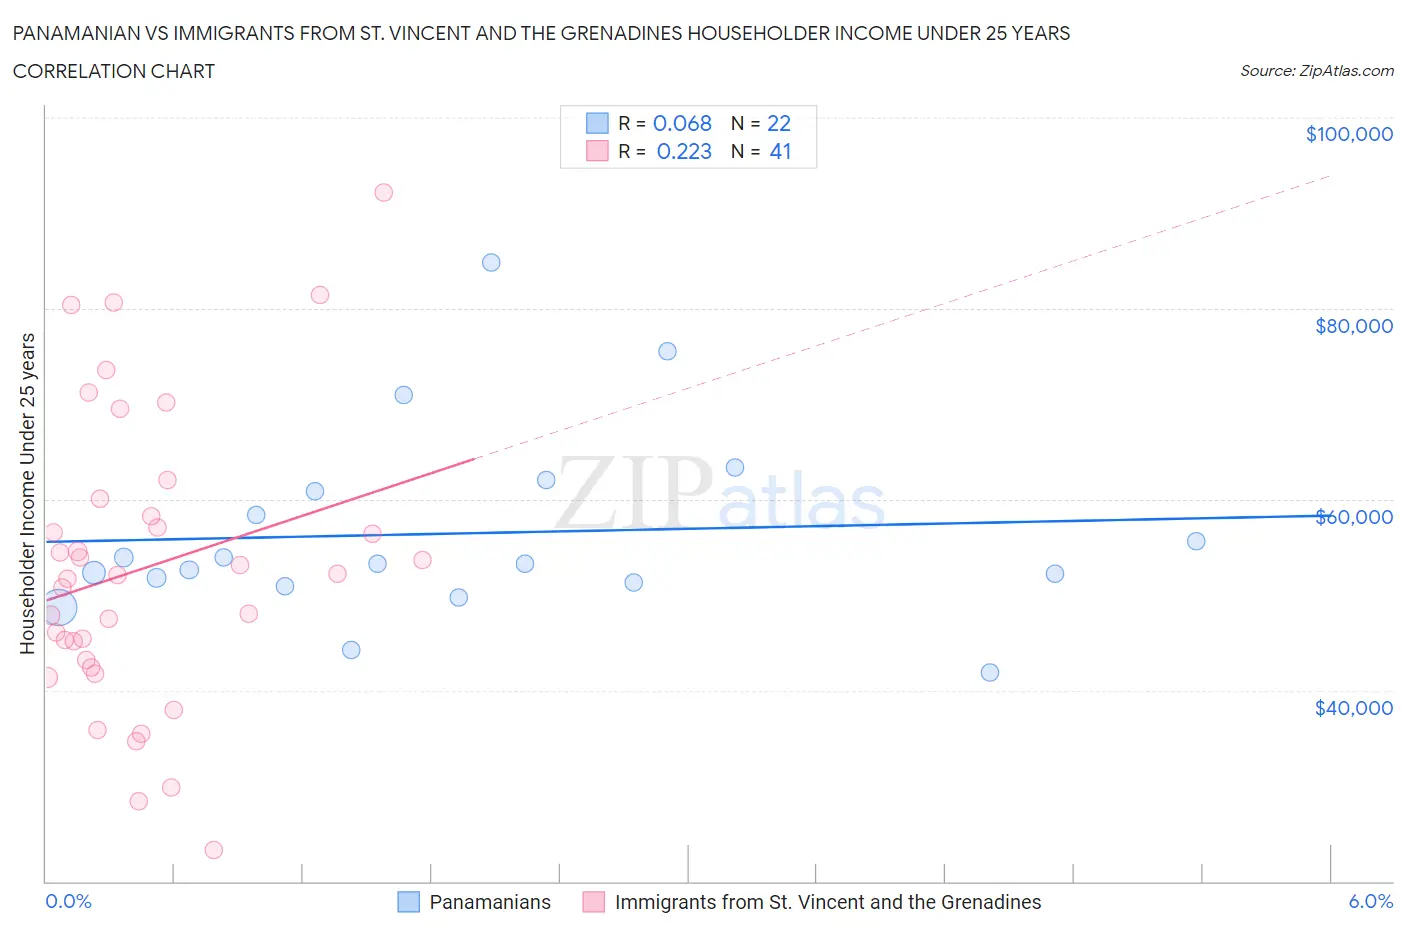 Panamanian vs Immigrants from St. Vincent and the Grenadines Householder Income Under 25 years